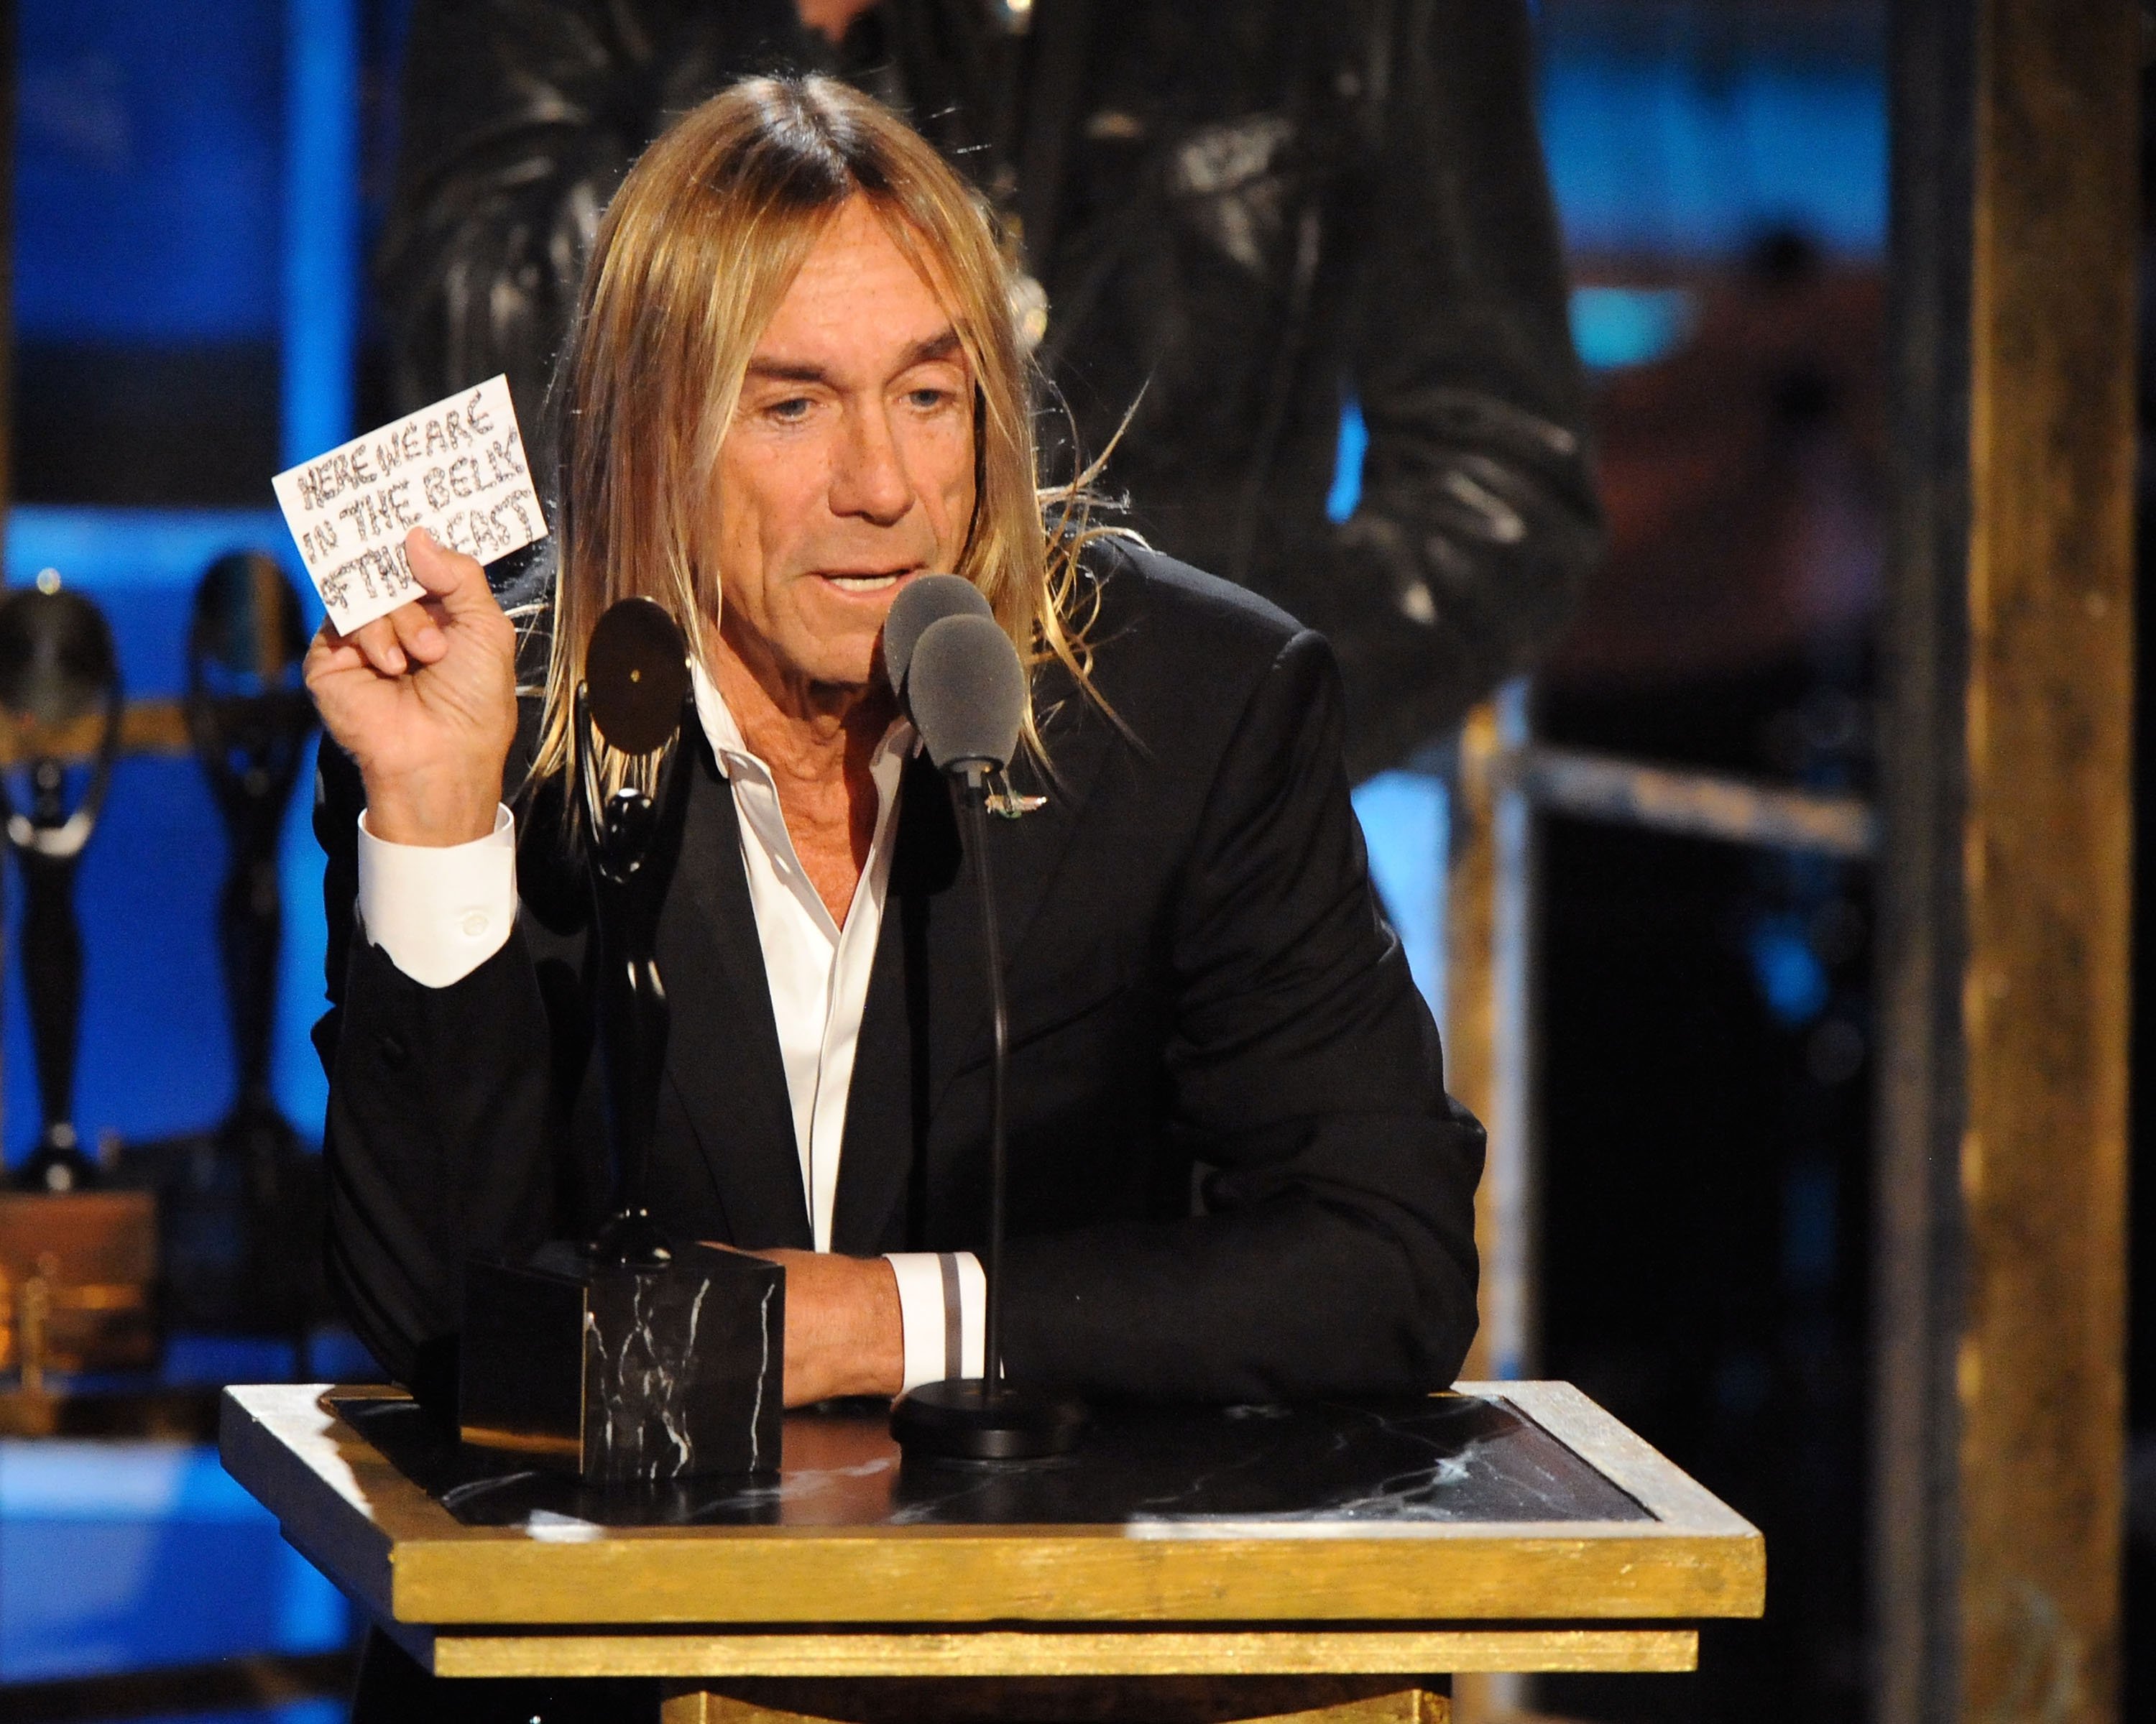 Iggy Pop of Iggy & the Stooges at the 25th Annual Rock and Roll Hall of Fame Induction Ceremony in 2010 in New York City. | Source: Getty Images